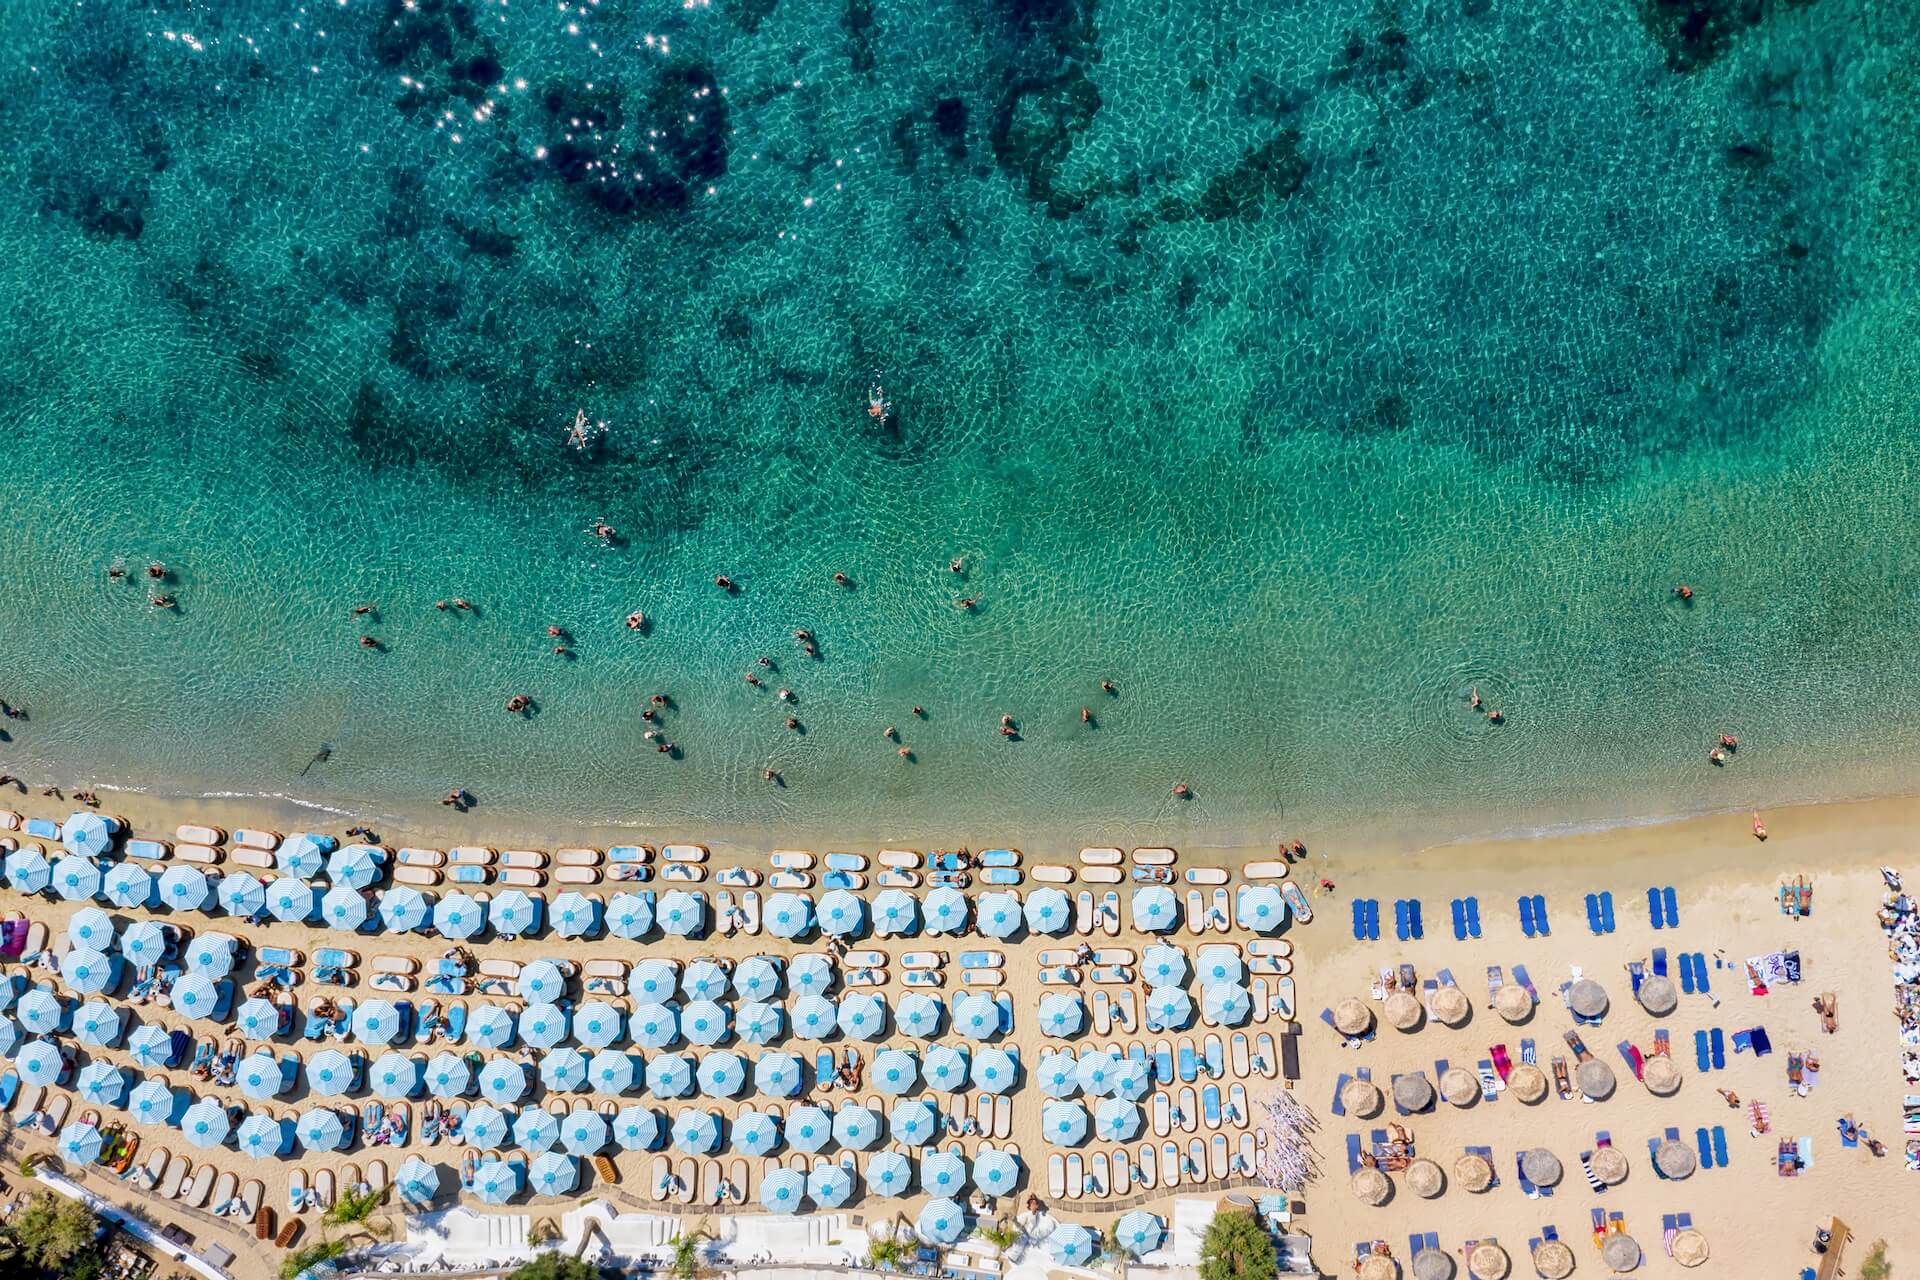 A view of the beach in Mykonos from the sky